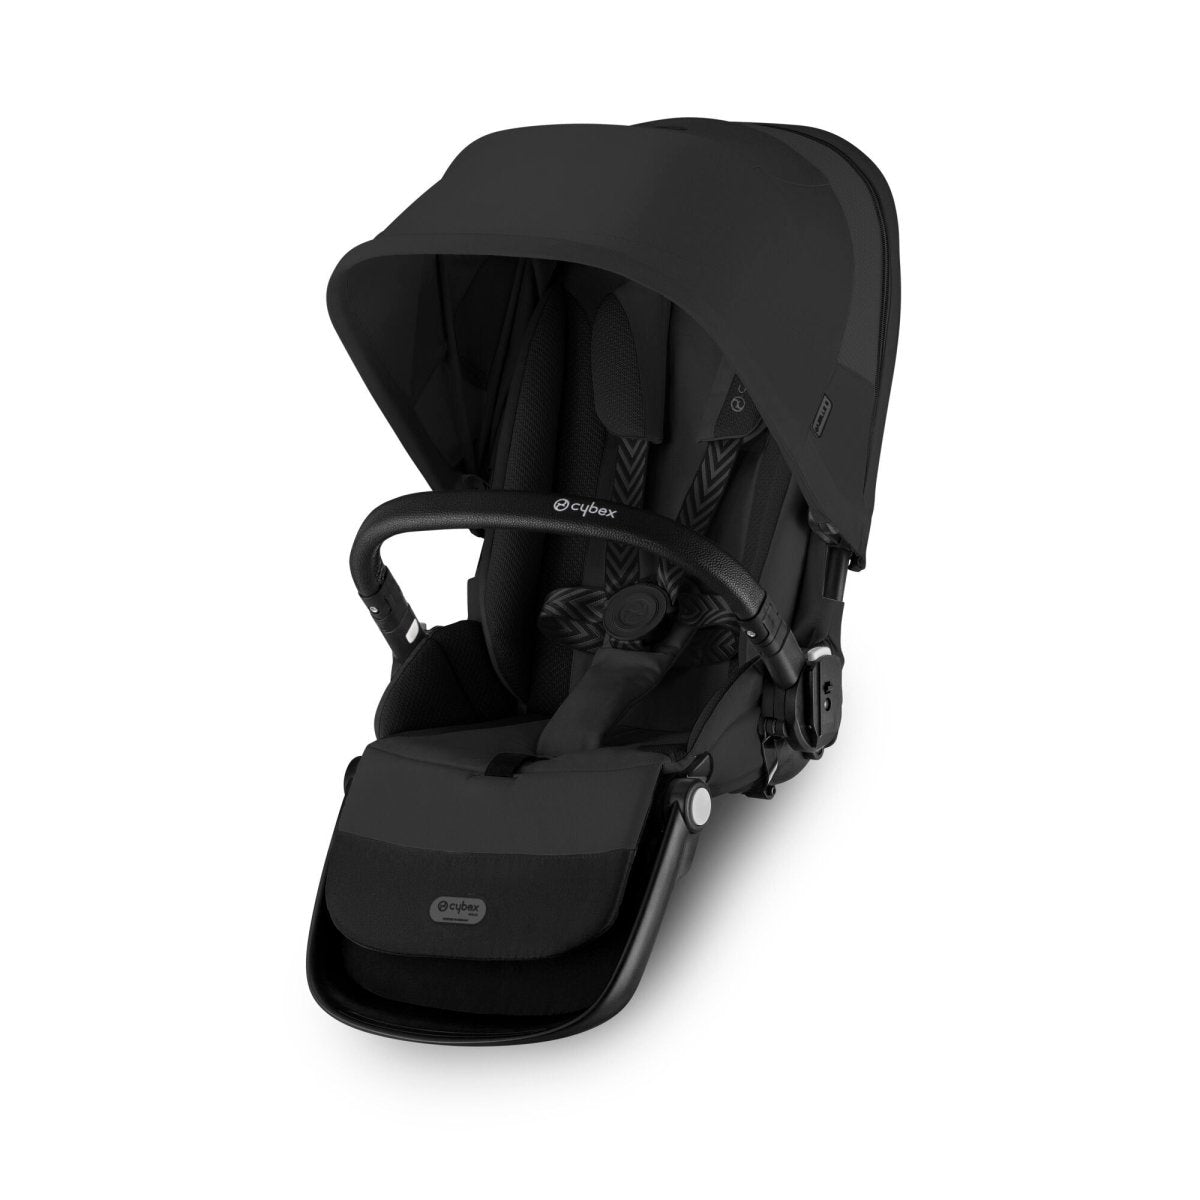 Cybex Asiento complementario Coche GAZELLE S One-Pull